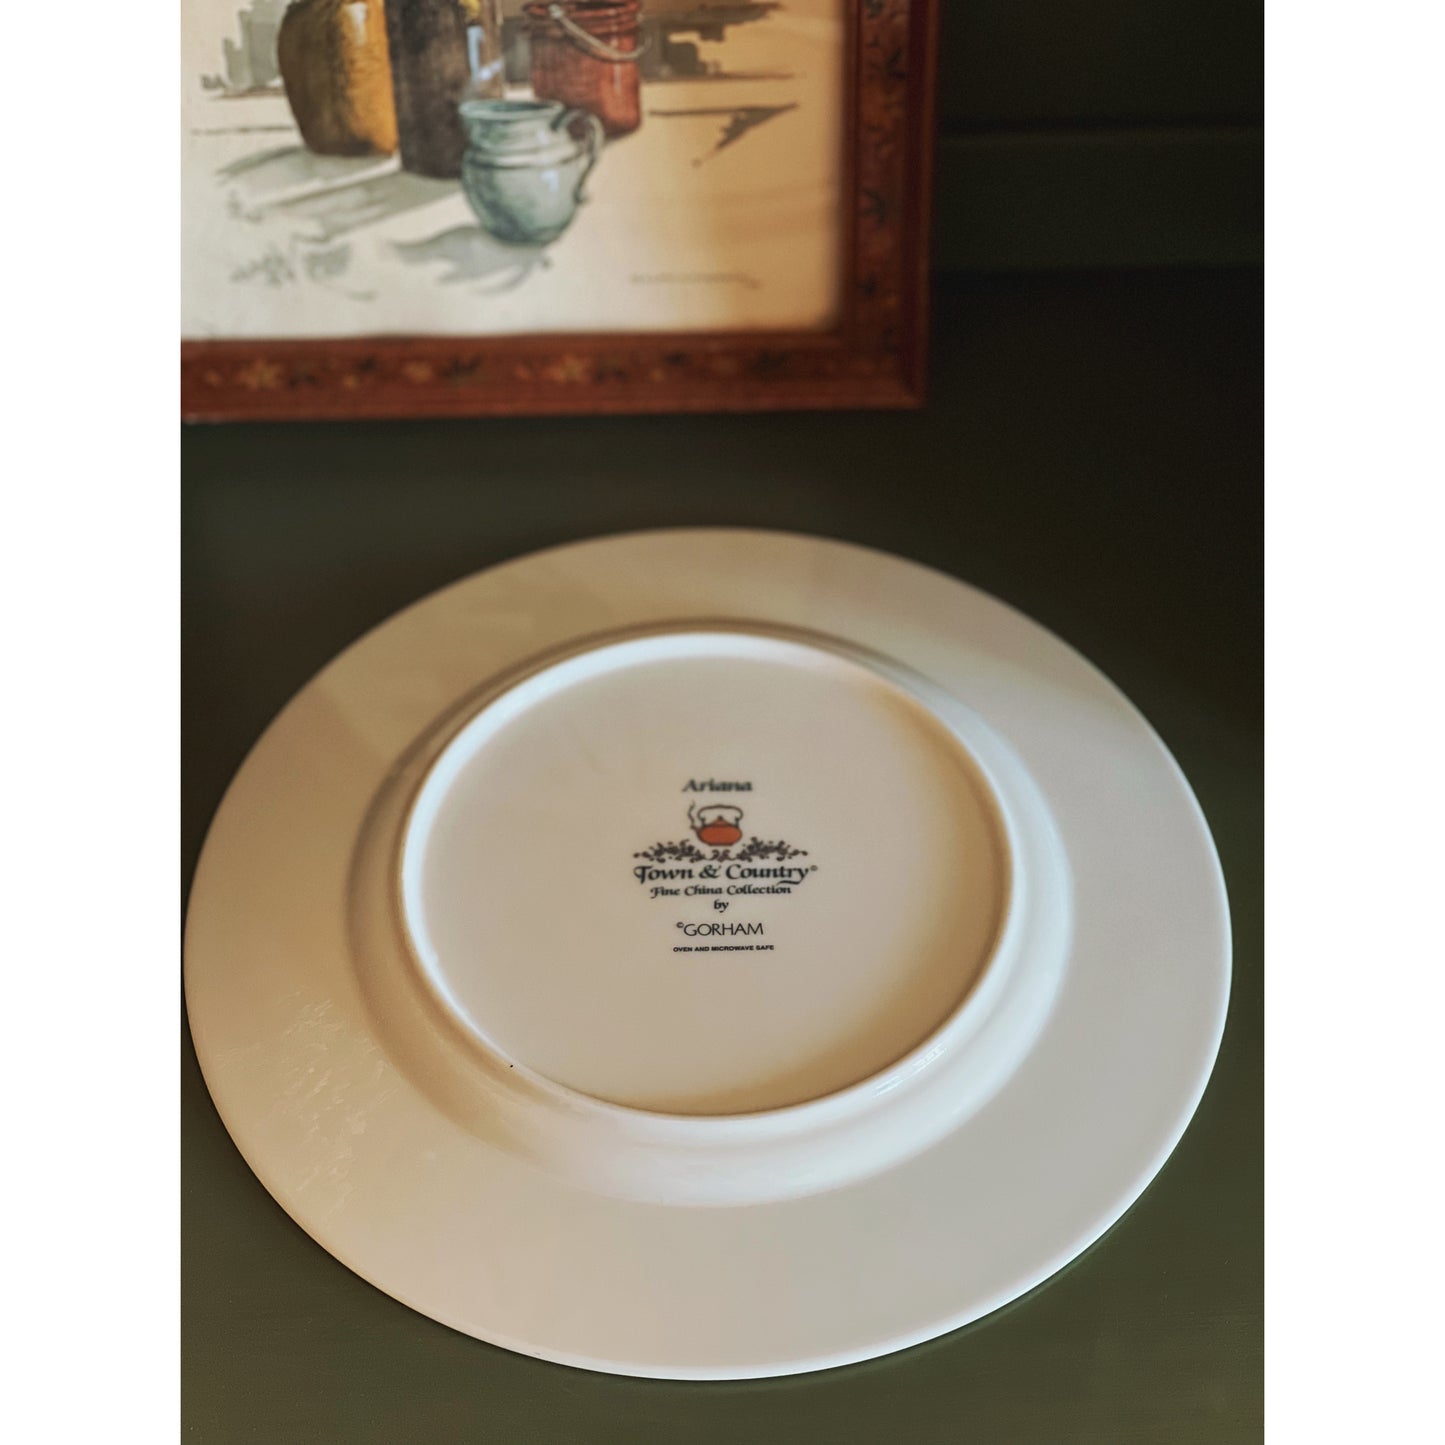 Set of 4 Vintage Gorham Ariana Town & Country Dinner Plates